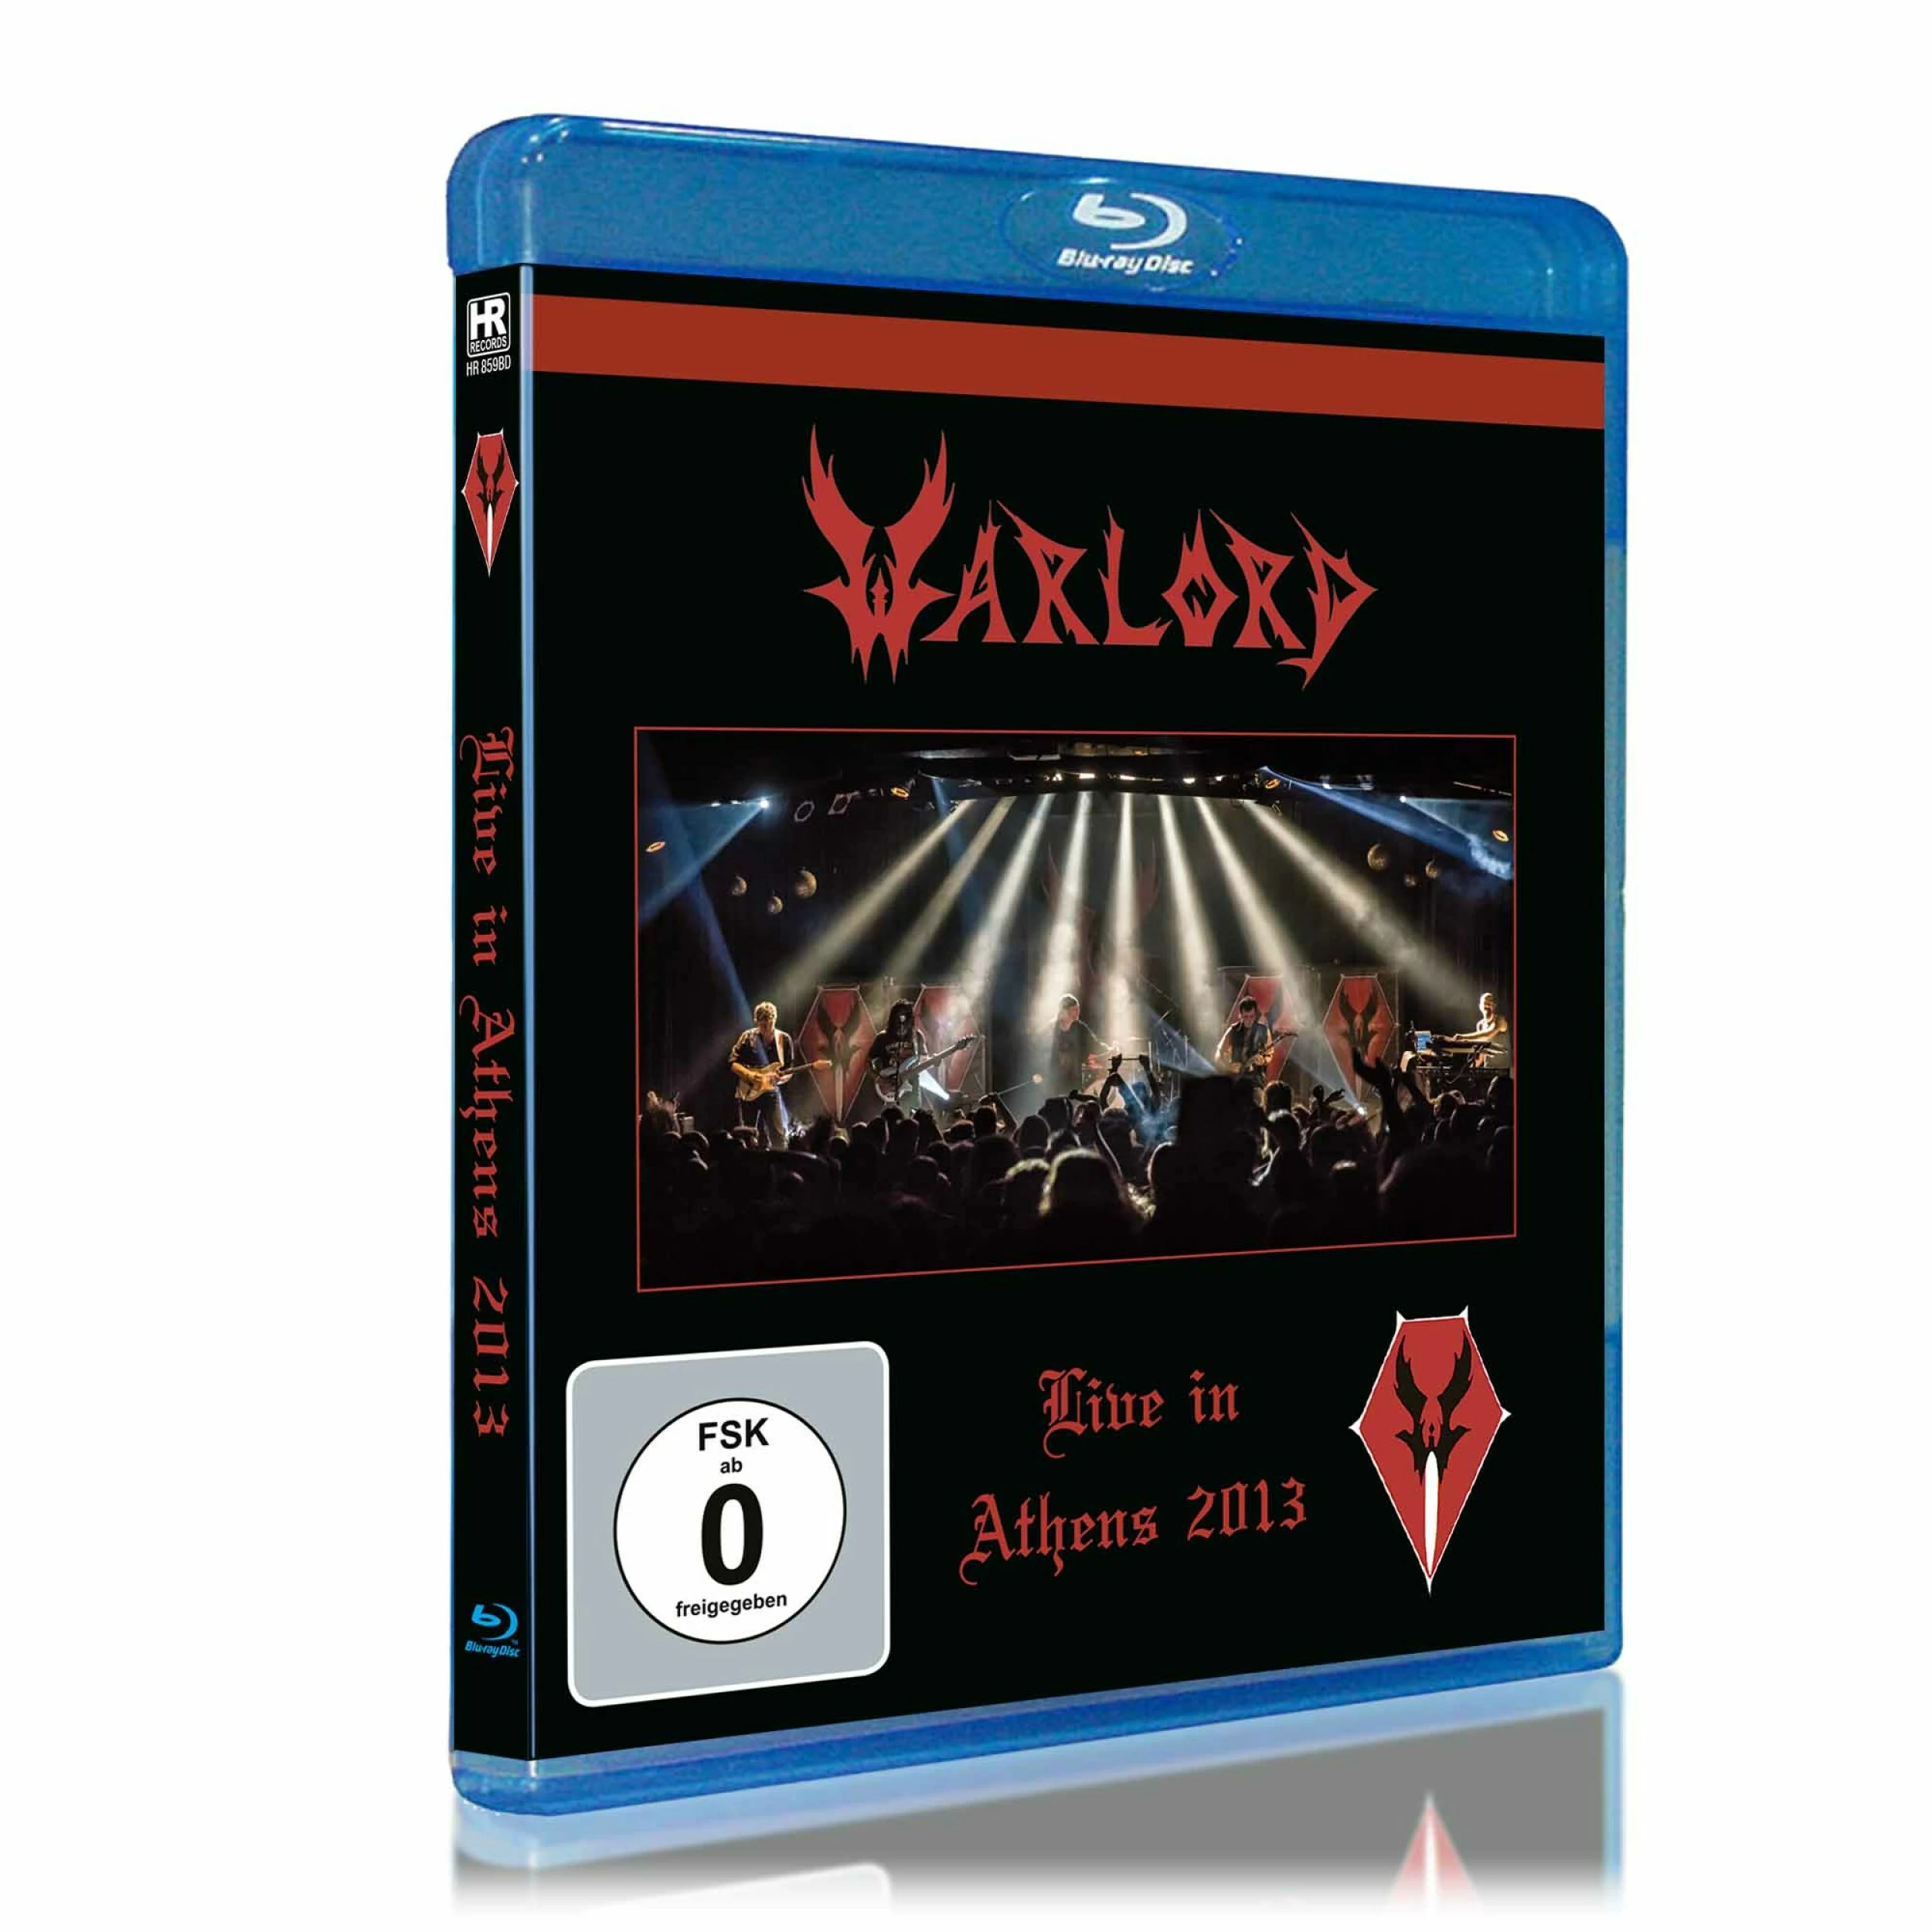 WARLORD - Live in Athens 2013 [BLU-RAY]